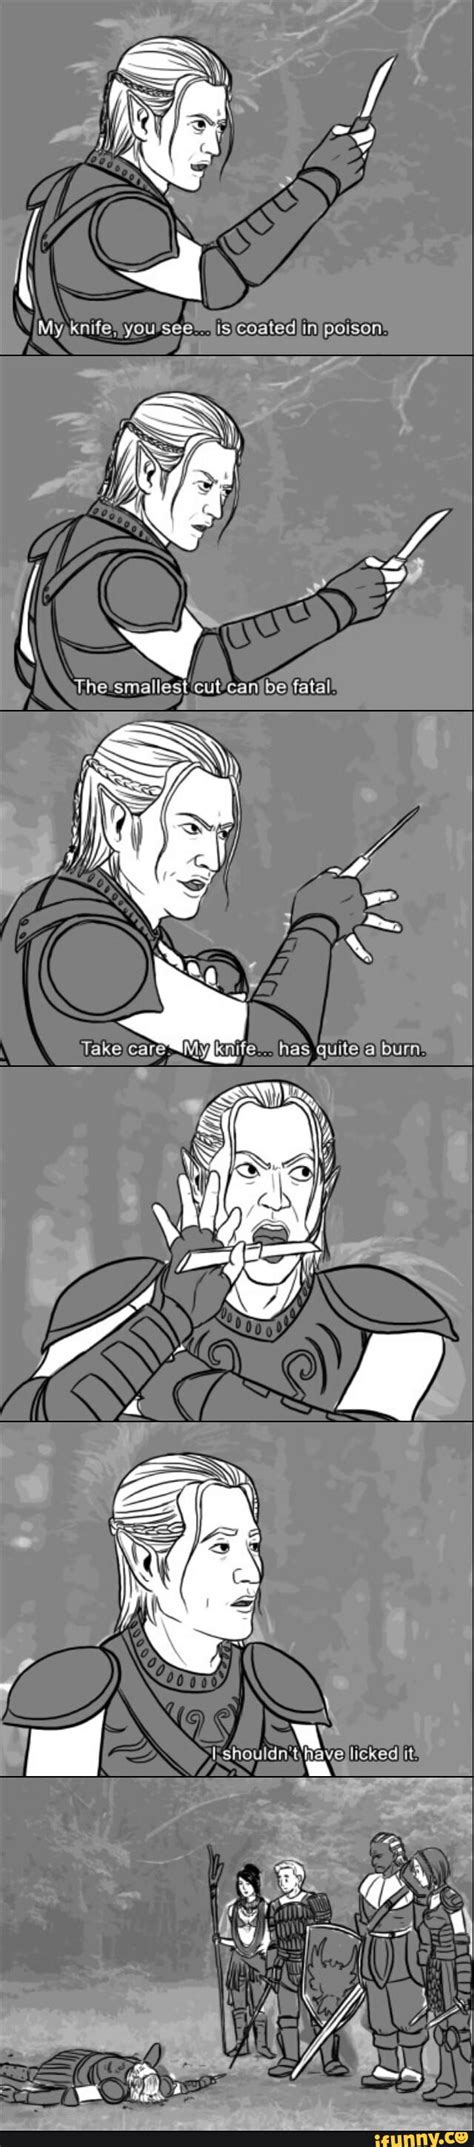 dragon age origins again shouldn t be this funny but